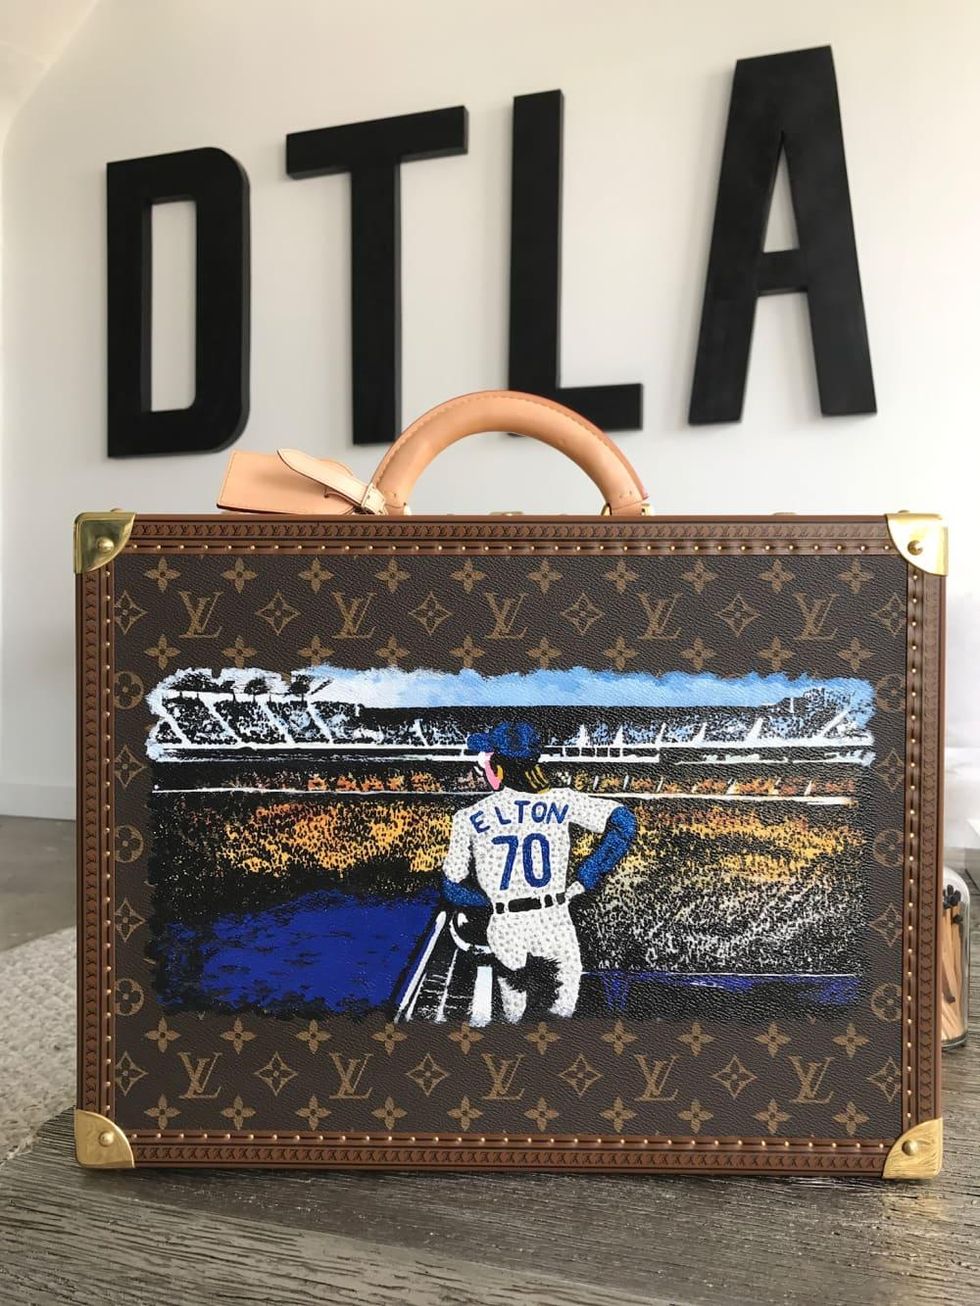 Check out this @louisvuitton bag we painted. Head over to our